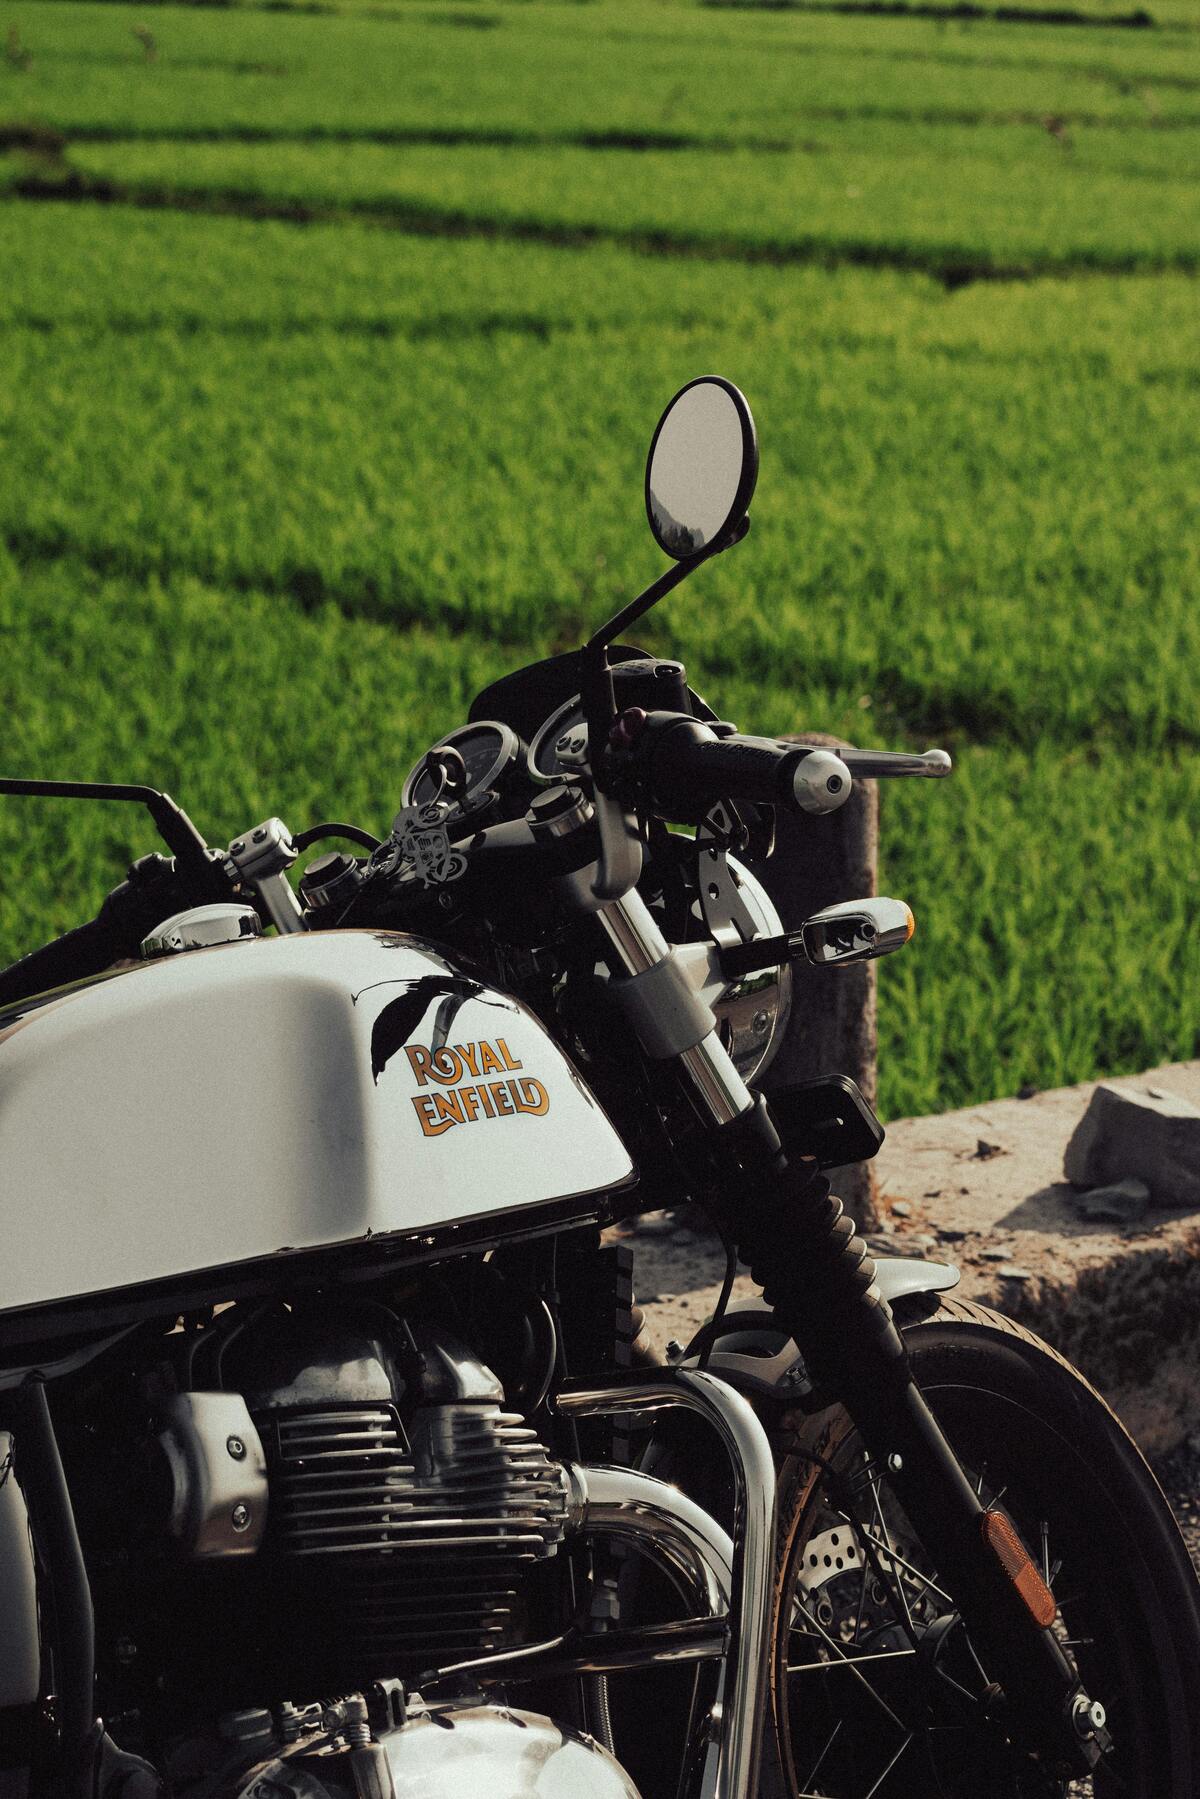 What does motorcycle insurance cover?